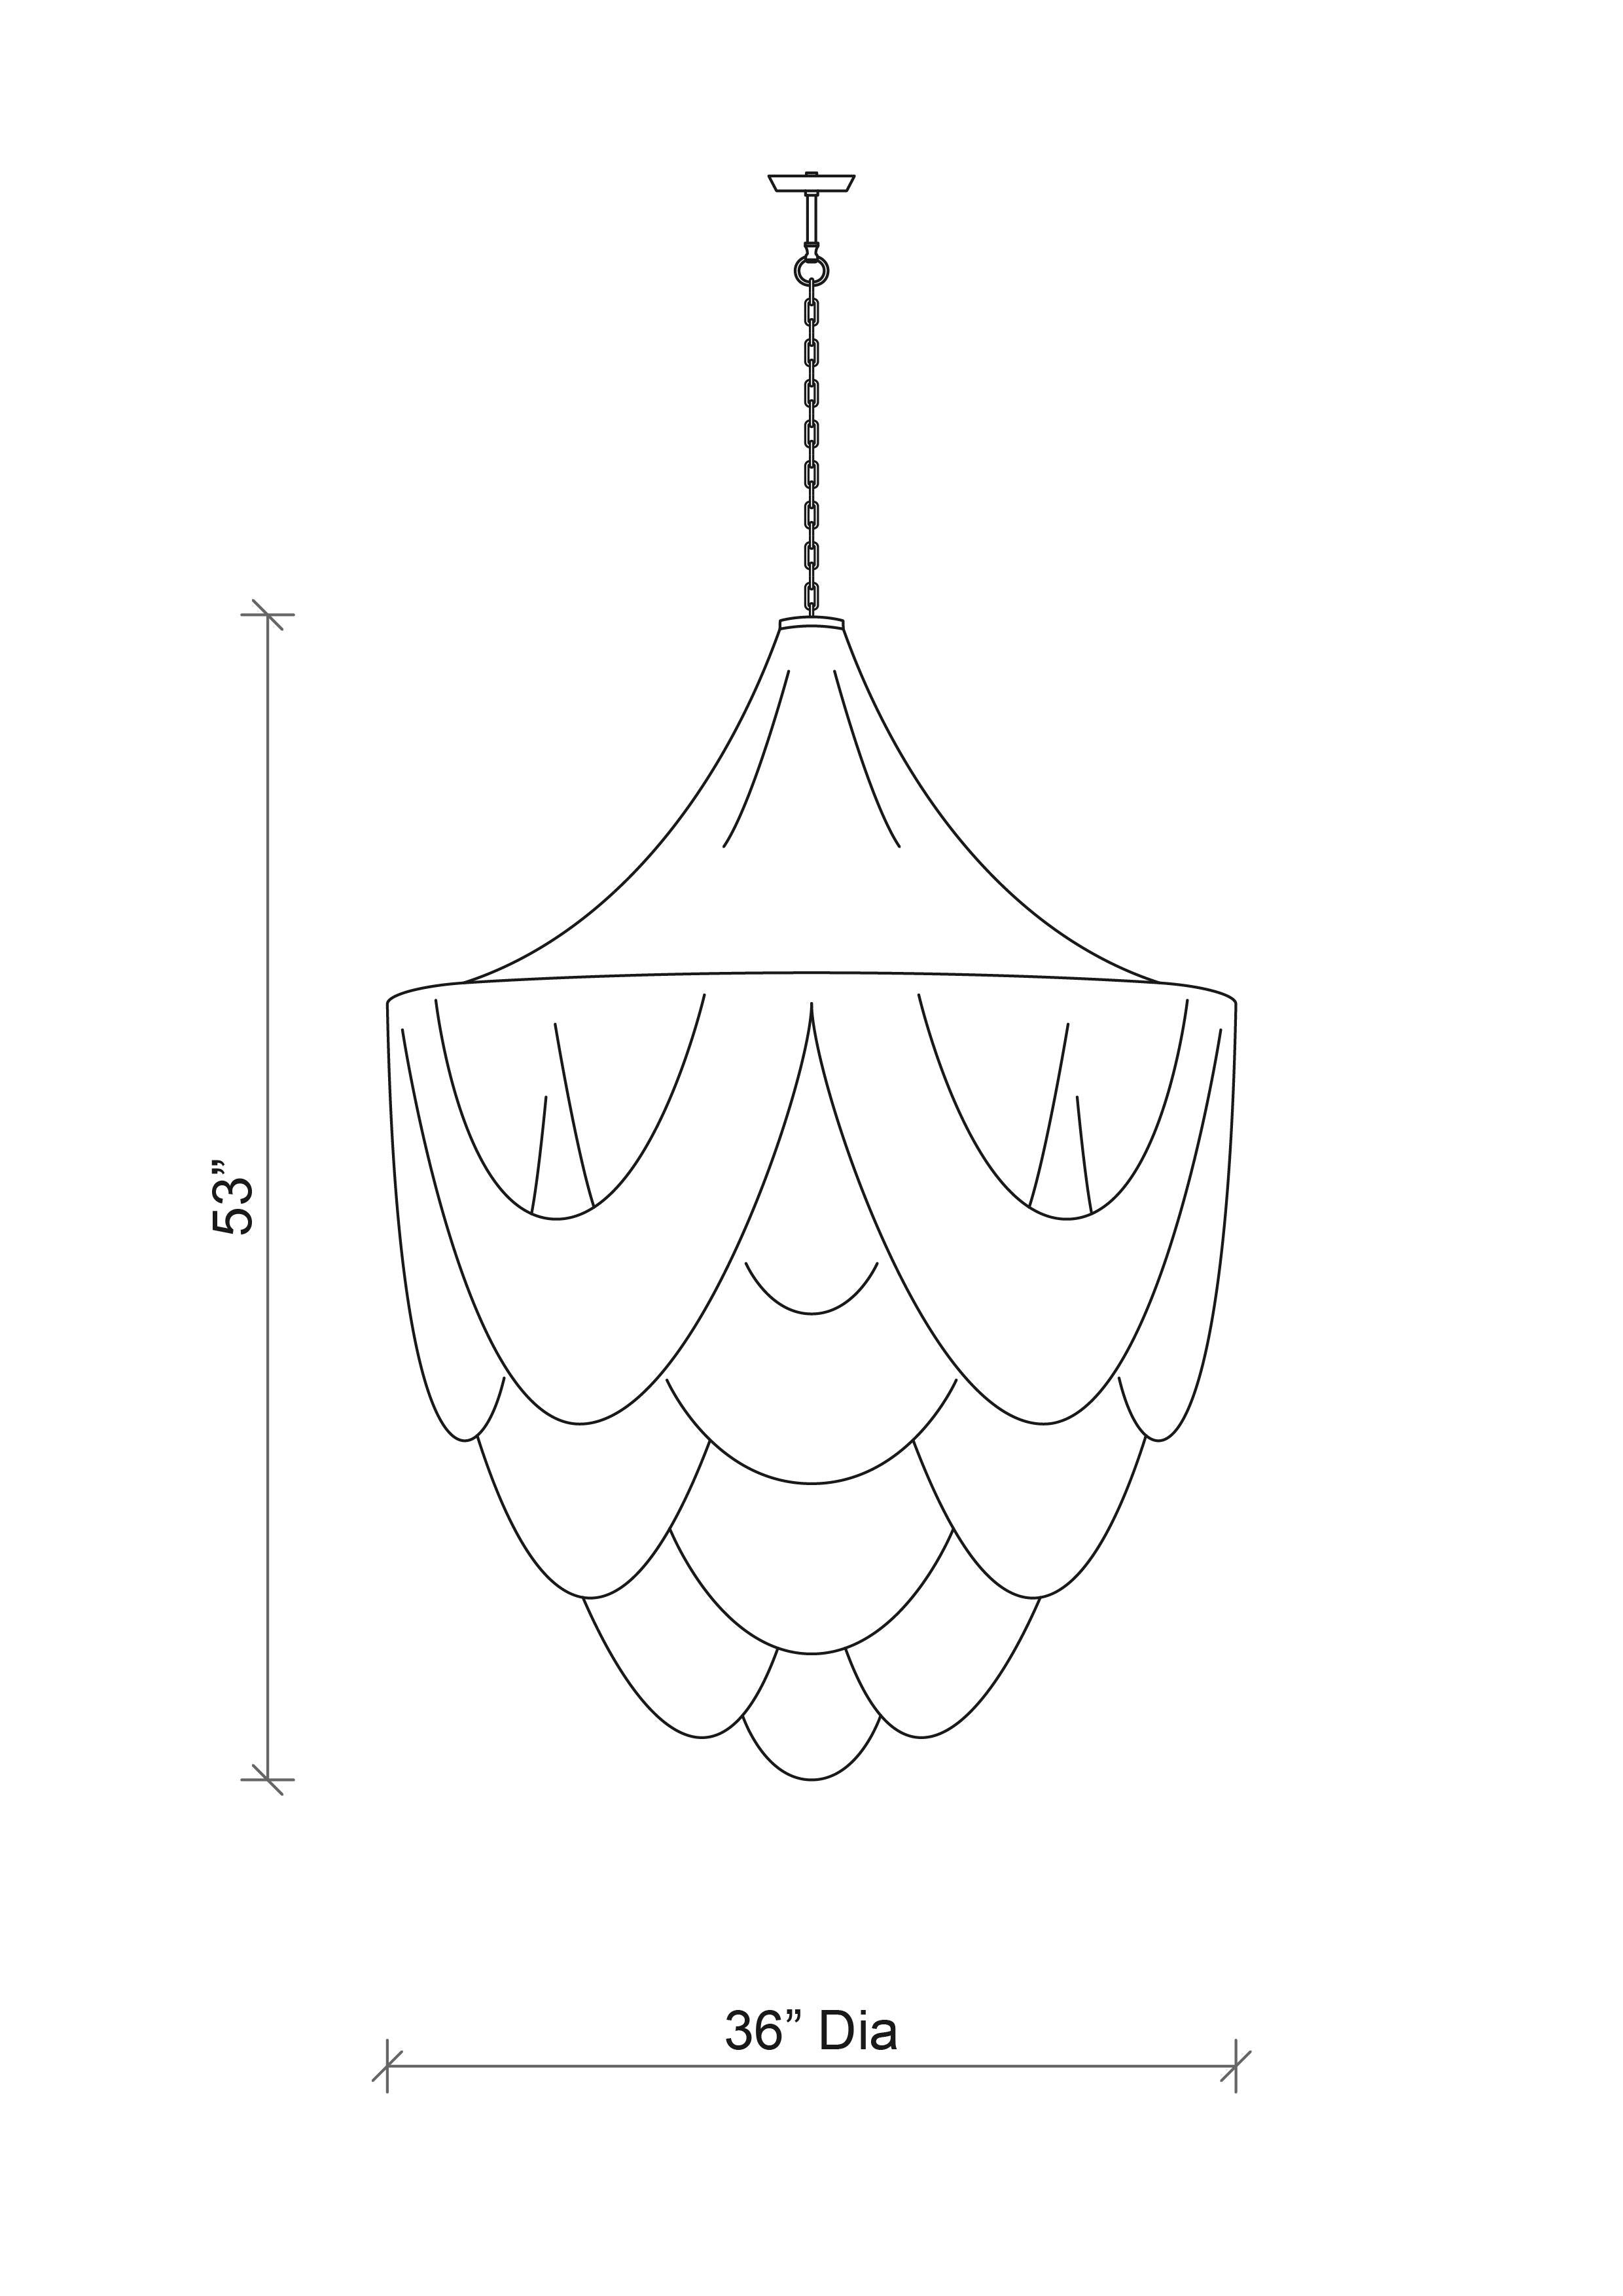 Extra Large Round Whisper with Crown Leather Chandelier in Metallic Leather